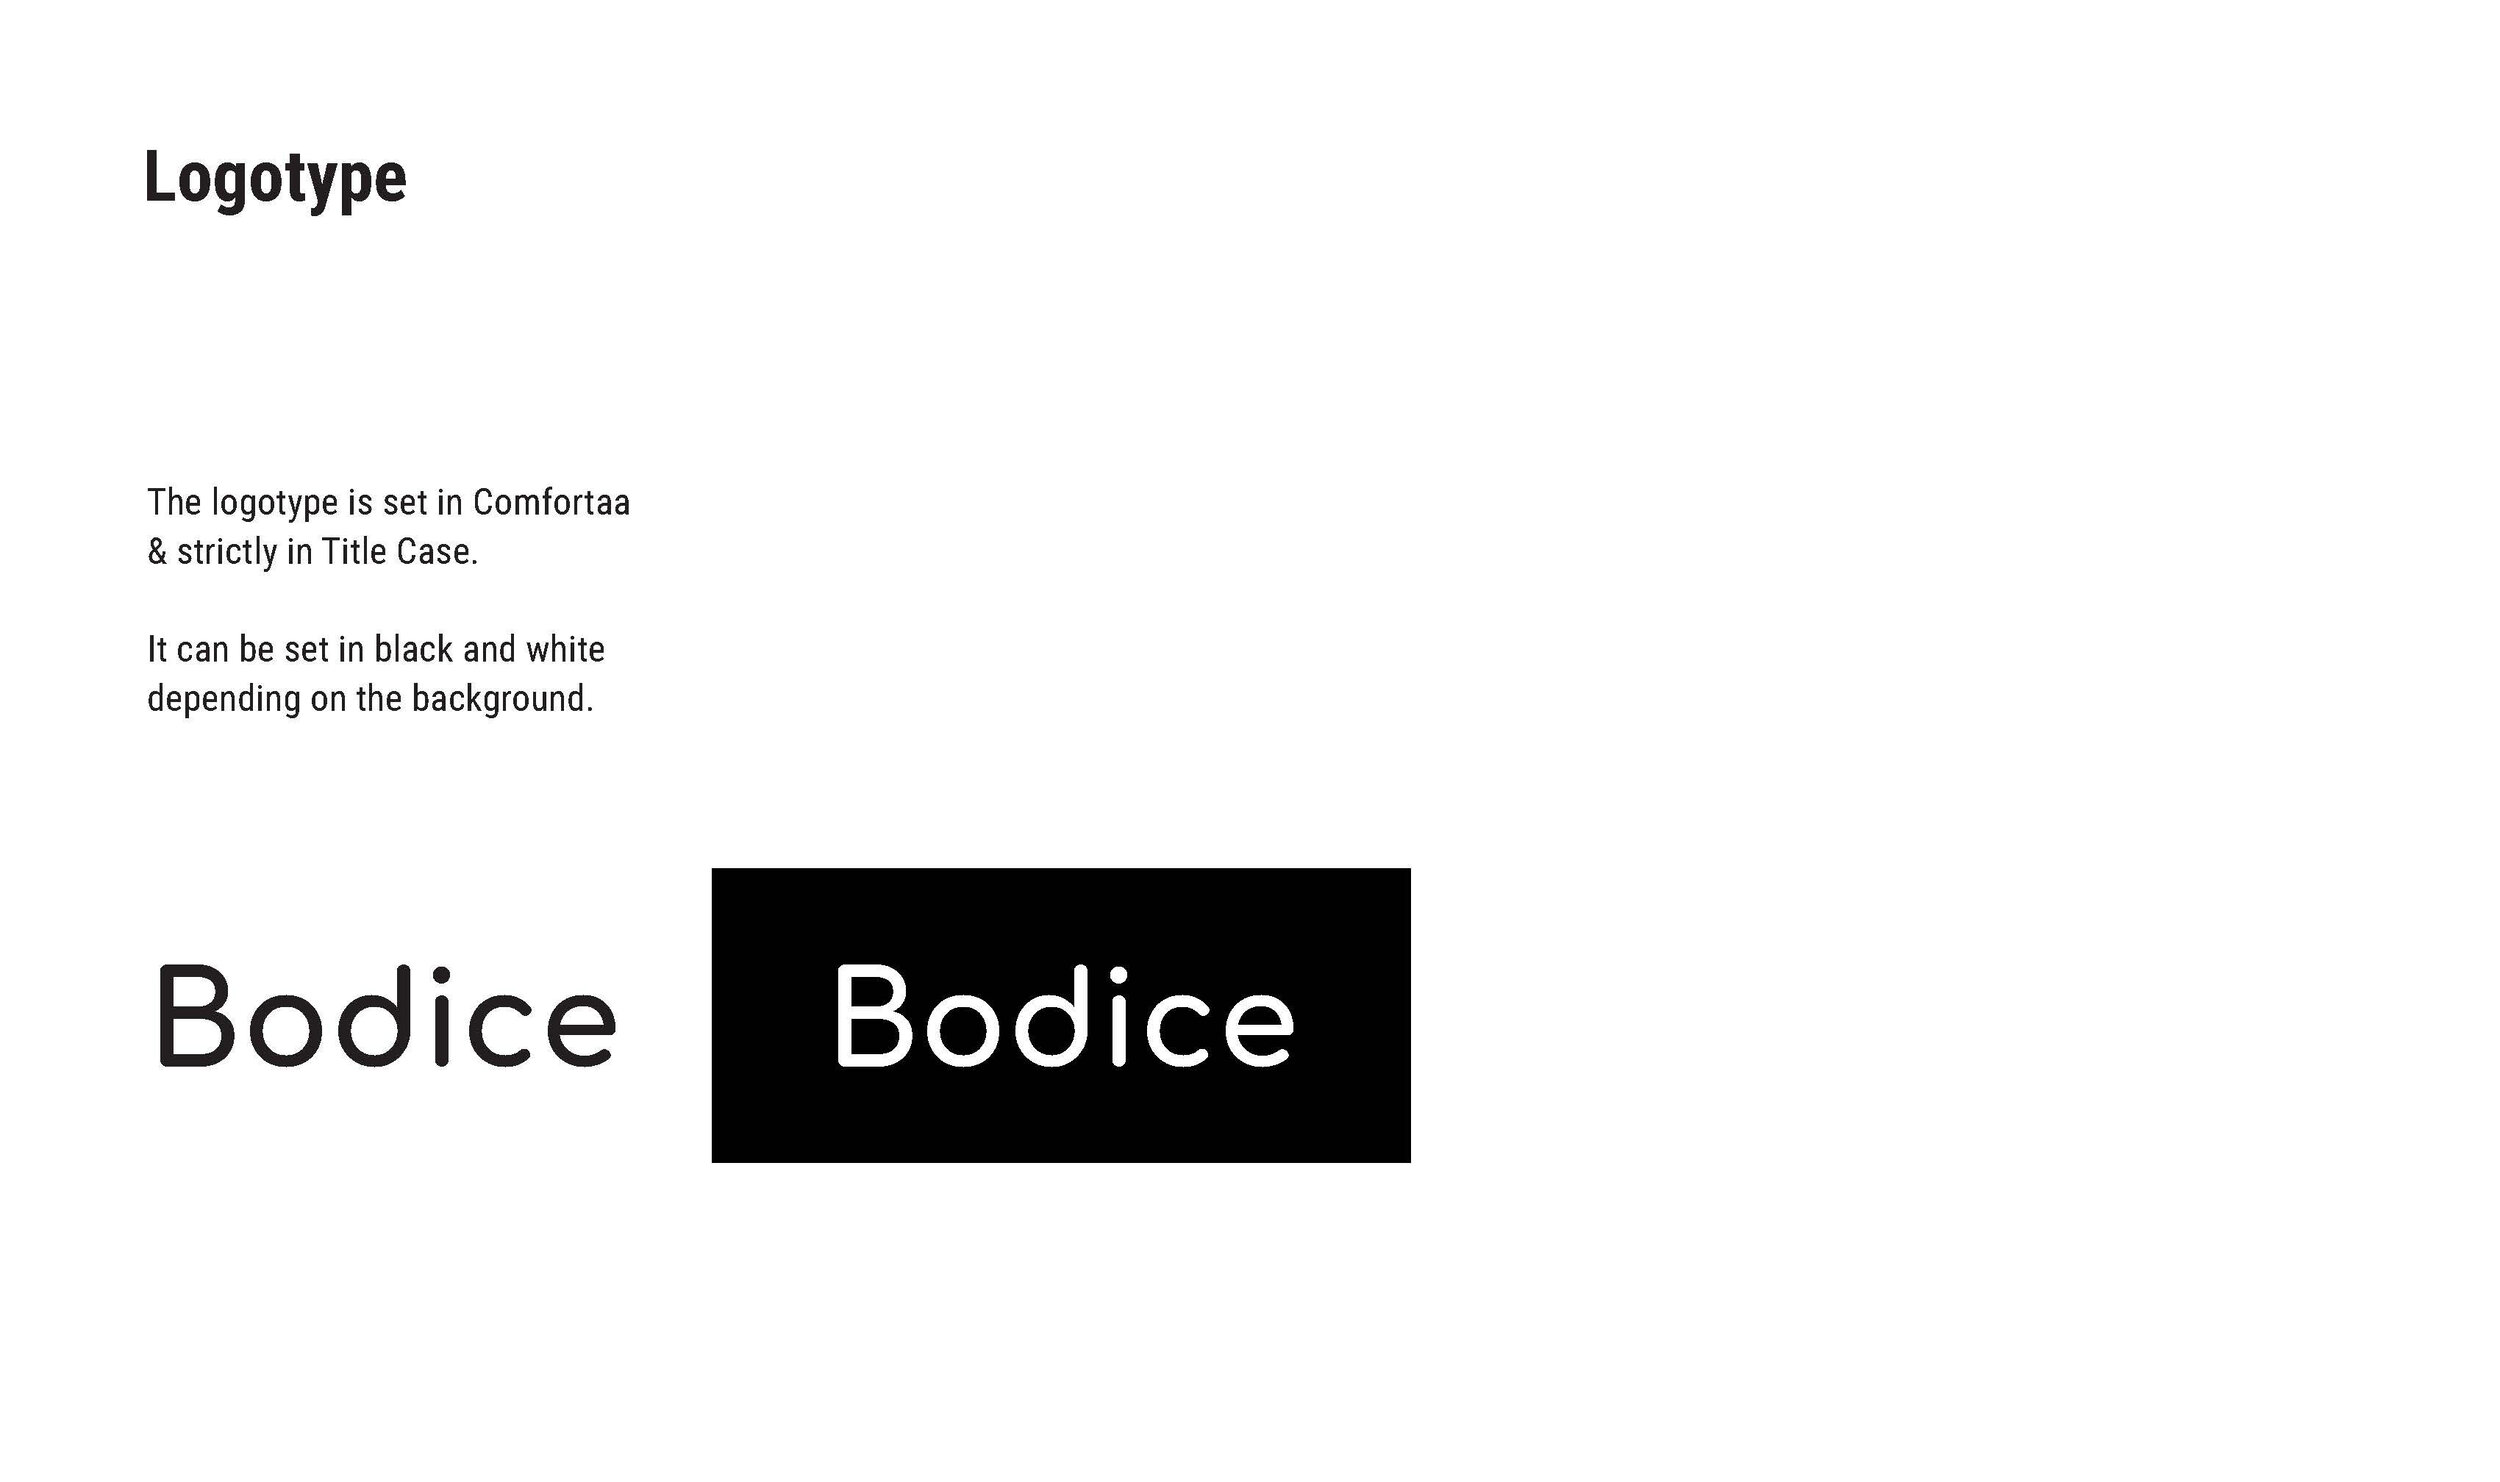 Exercise_5.3_Bodice_Brand_Guidelines_Page_03.jpg